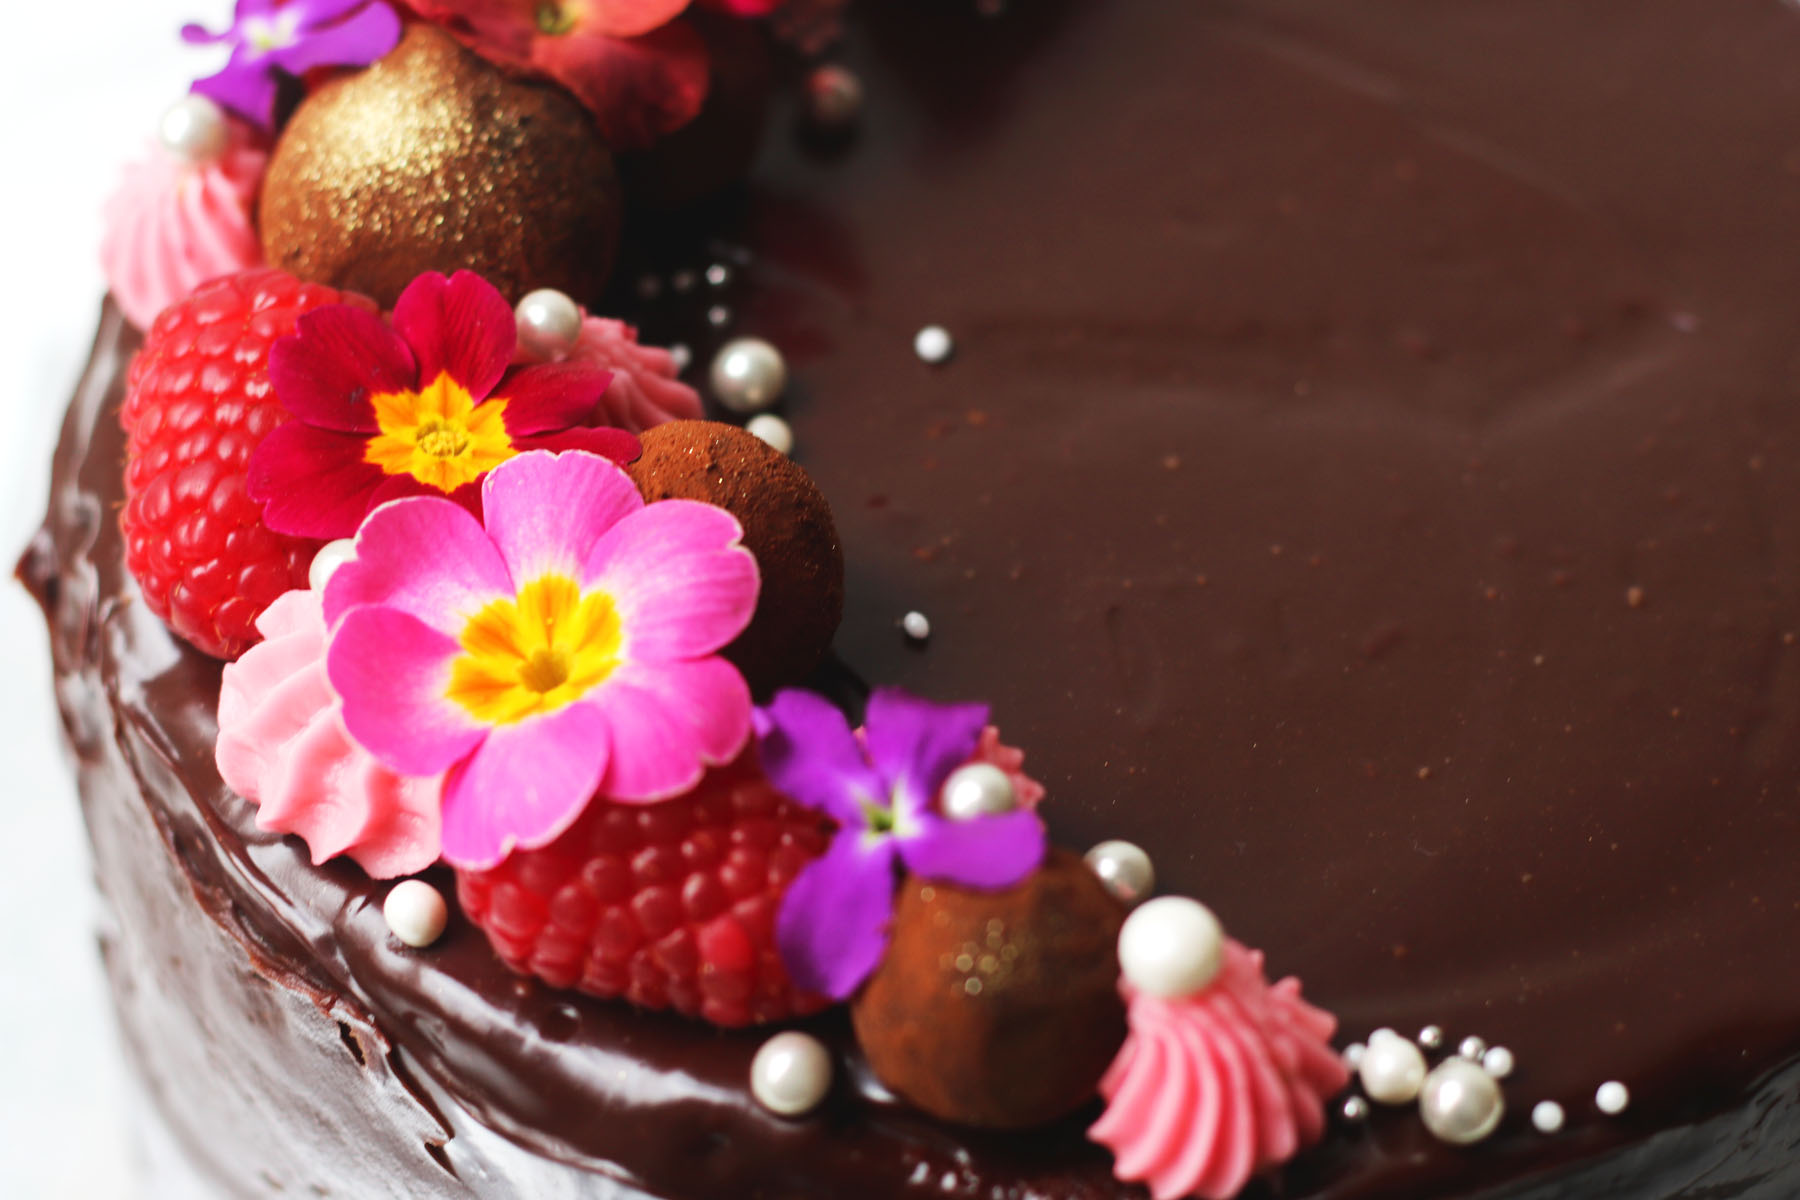 33 Edible Flower Cakes That're Simple But Outstanding : Chocolate